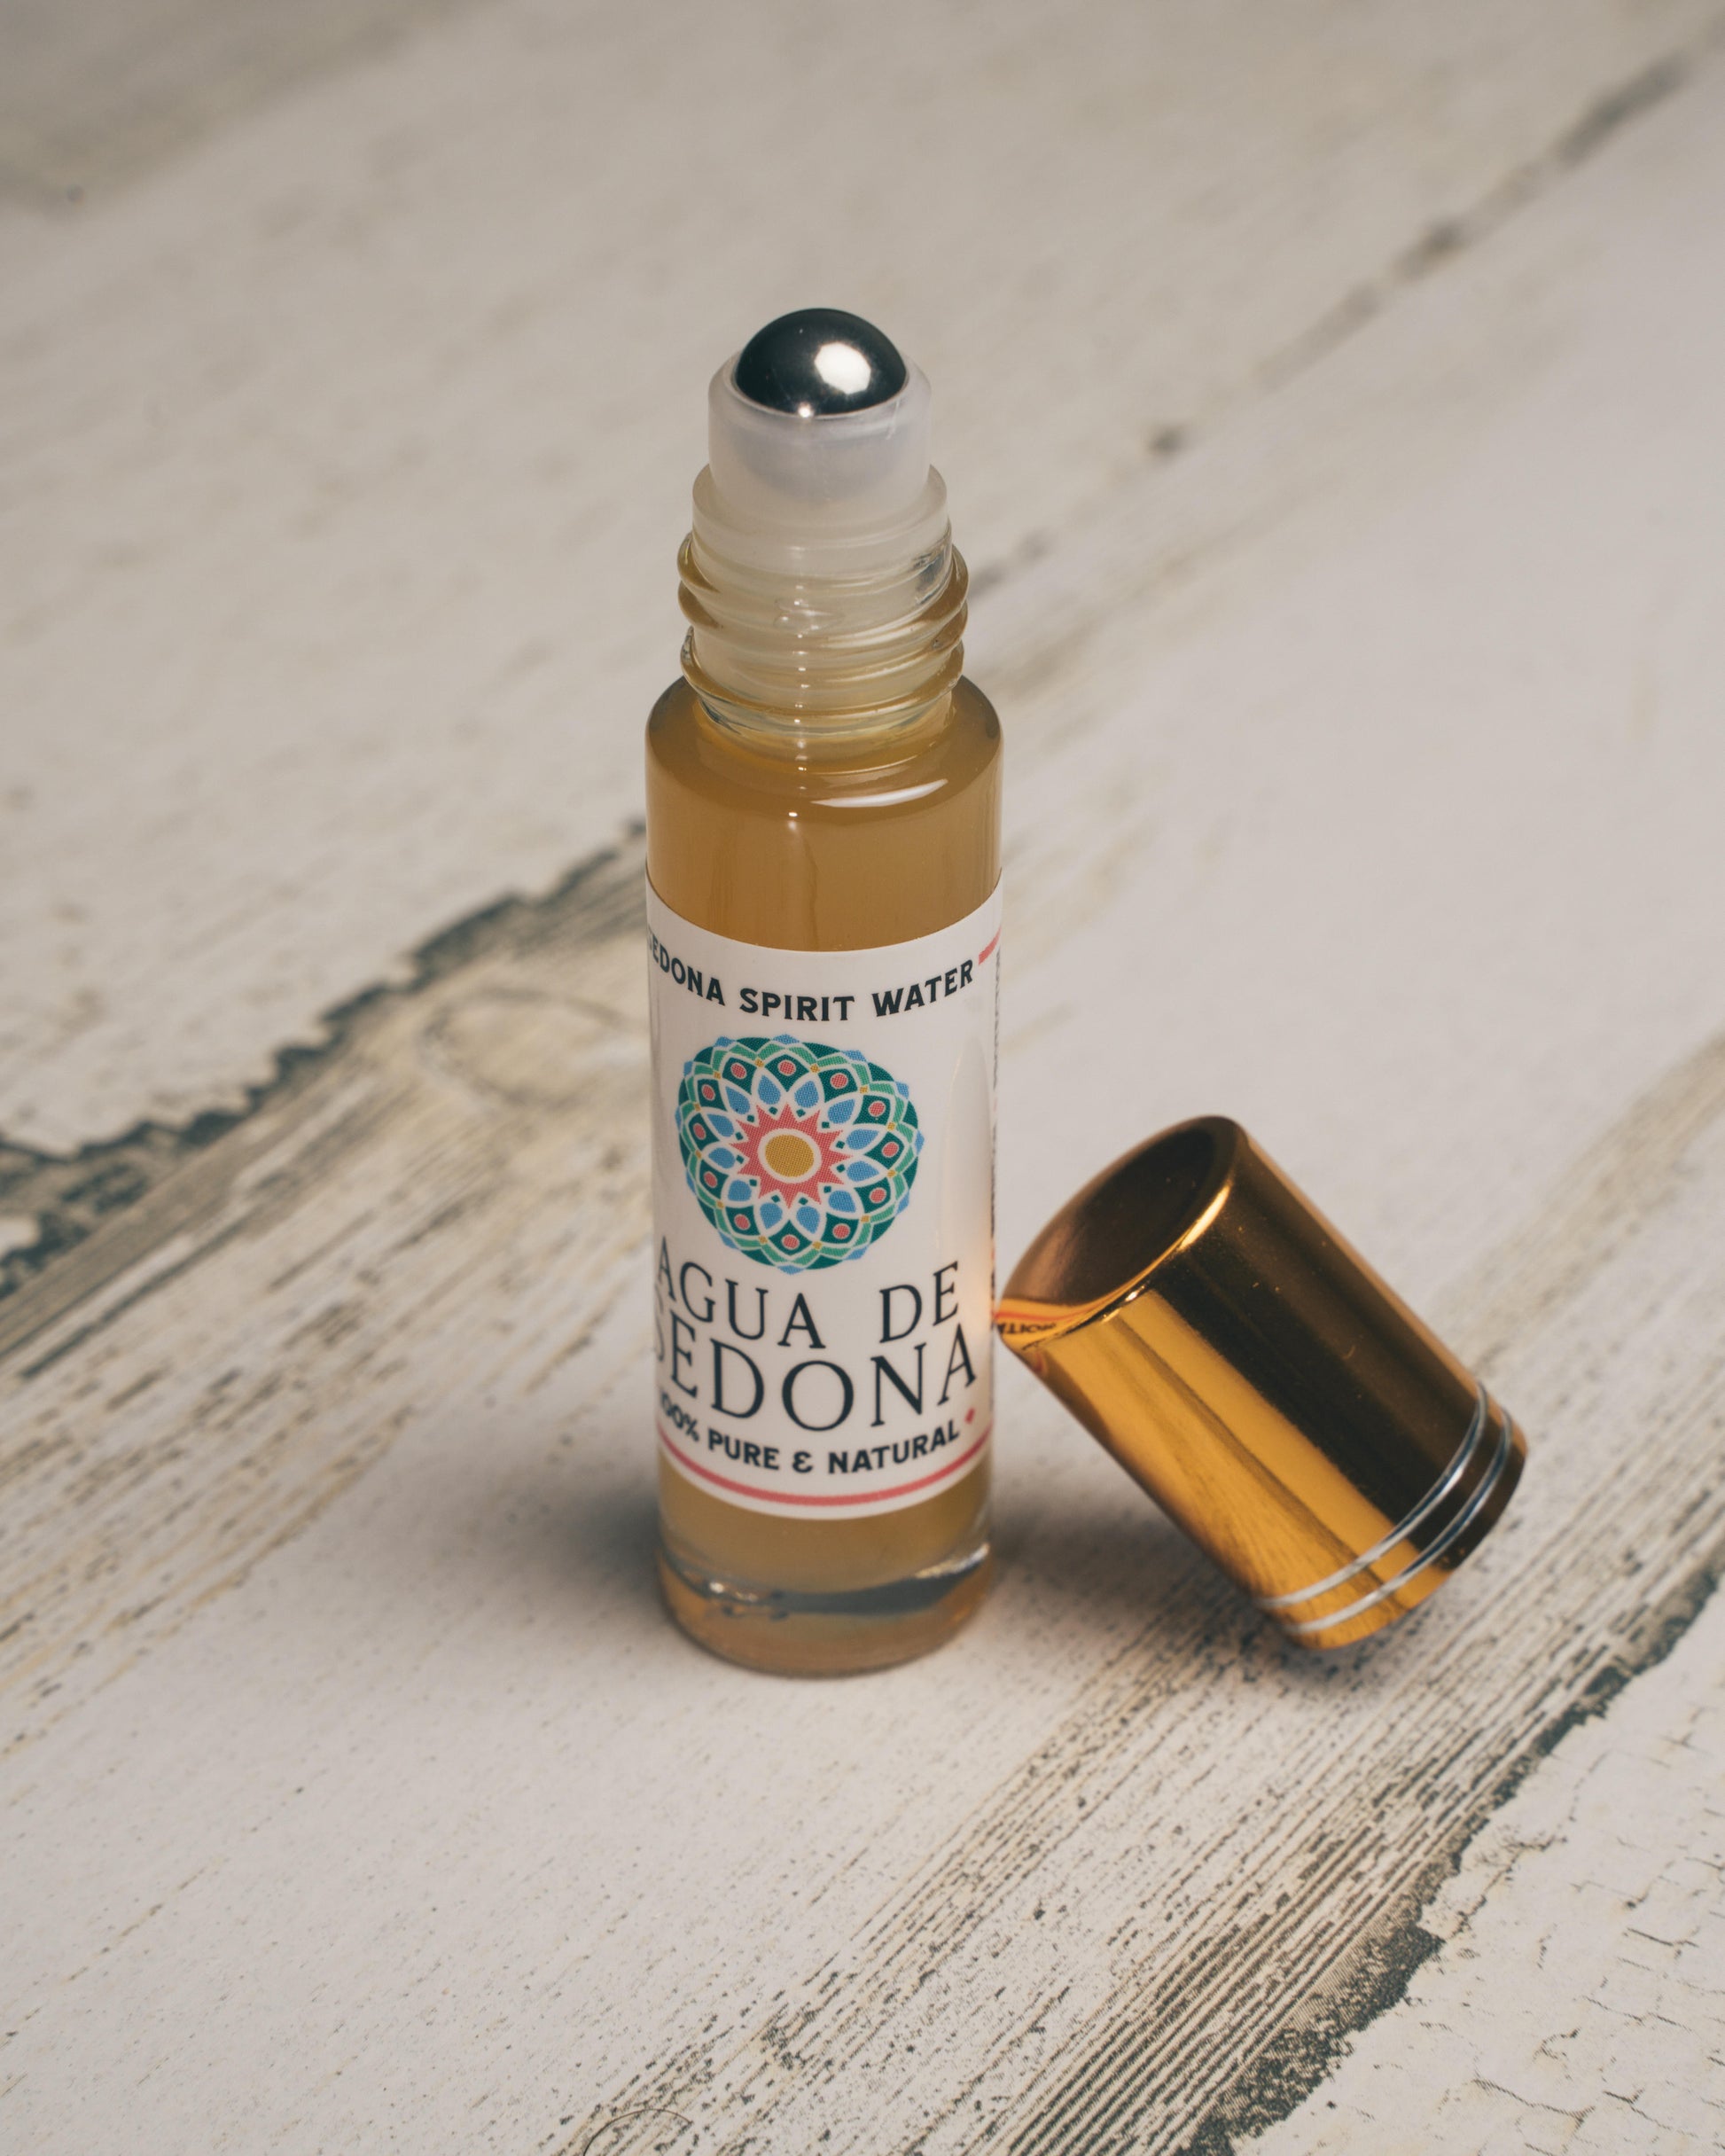 Sedona Spirit Water | Home of Agua de Sedona - All natural, boutique, handcrafted eau de toilettes, perfumes and colognes. Made in Sedona, AZ. The Spirit of Sedona in a Bottle. Spiritual Cologne. Spiritual Perfume. Oil Roll On.